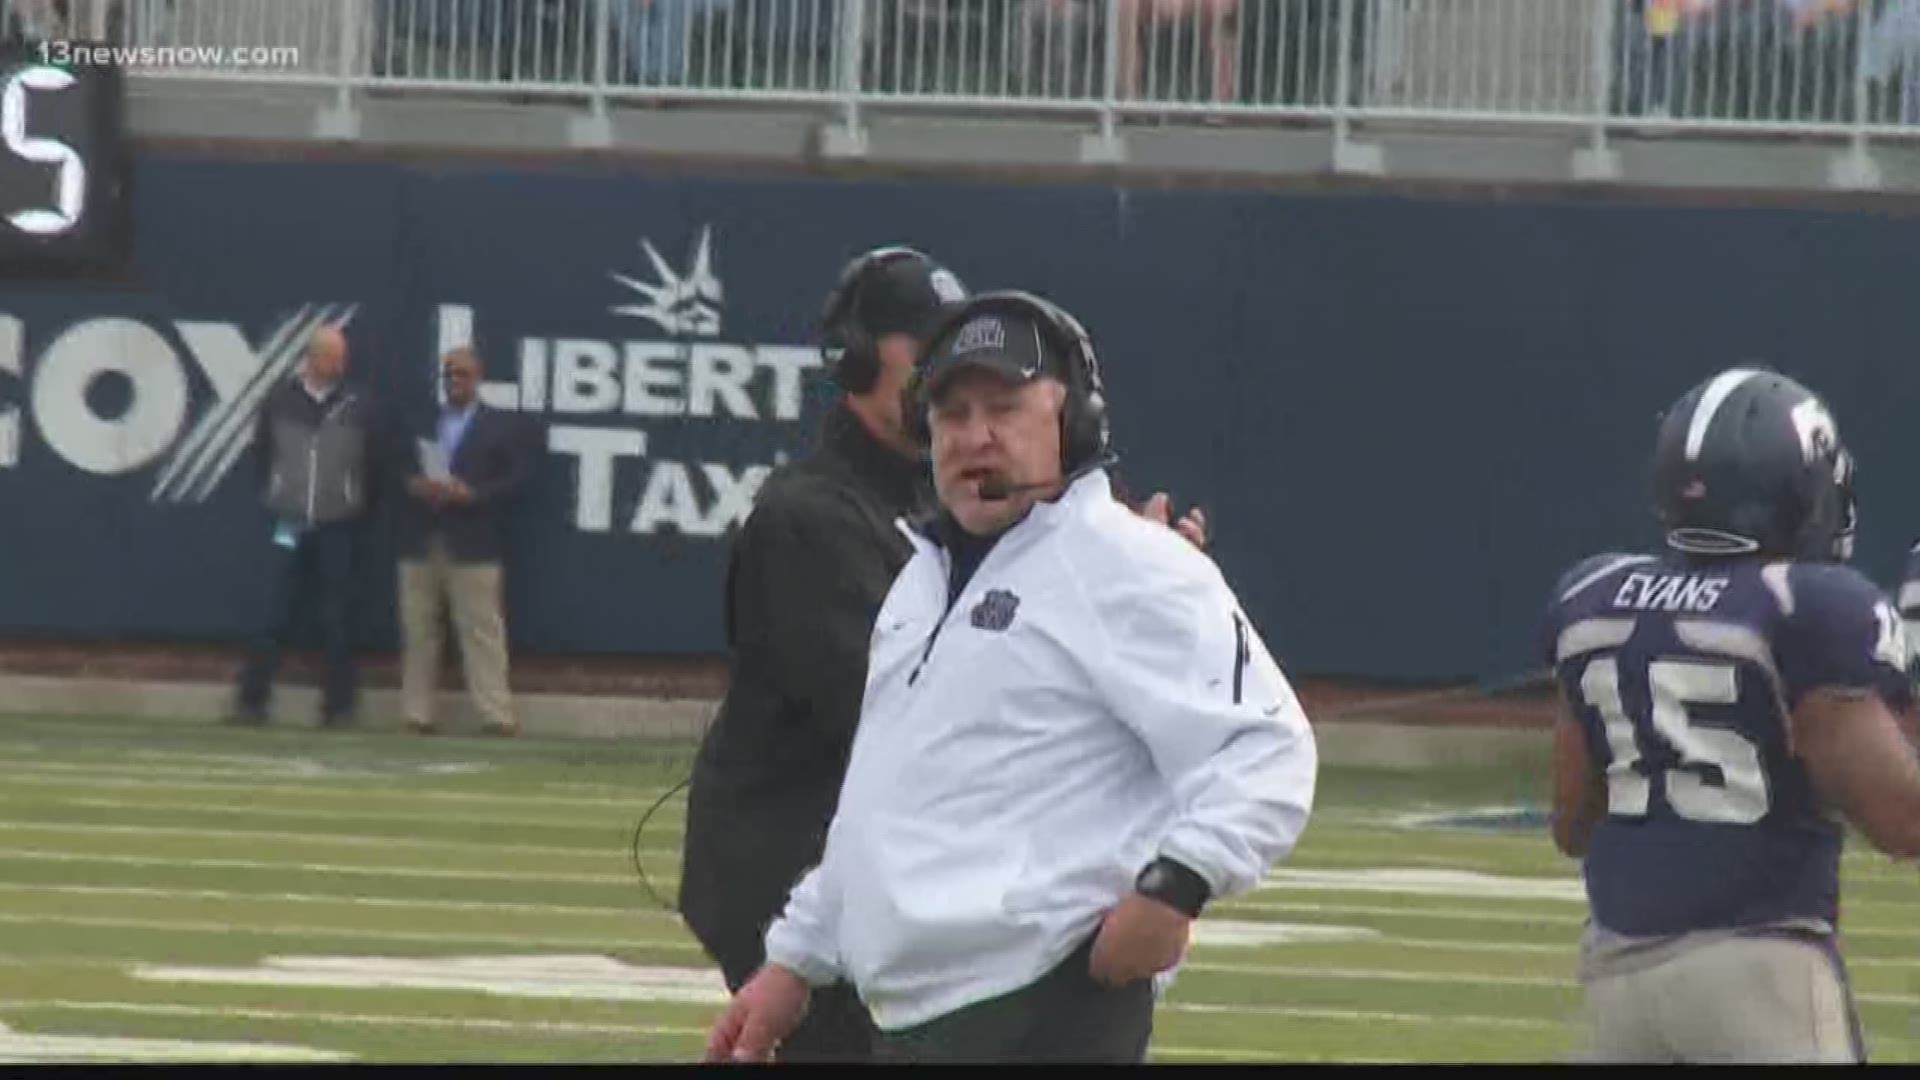 ODU head football coach, Bobby Wilder having to make changes to his staff by letting go of 4 assistant coaches. 3 of them on the defensive side of the ball. Among them, defensive coordinator Rich Nagy who leaves after 6 seasons with the Monarchs.